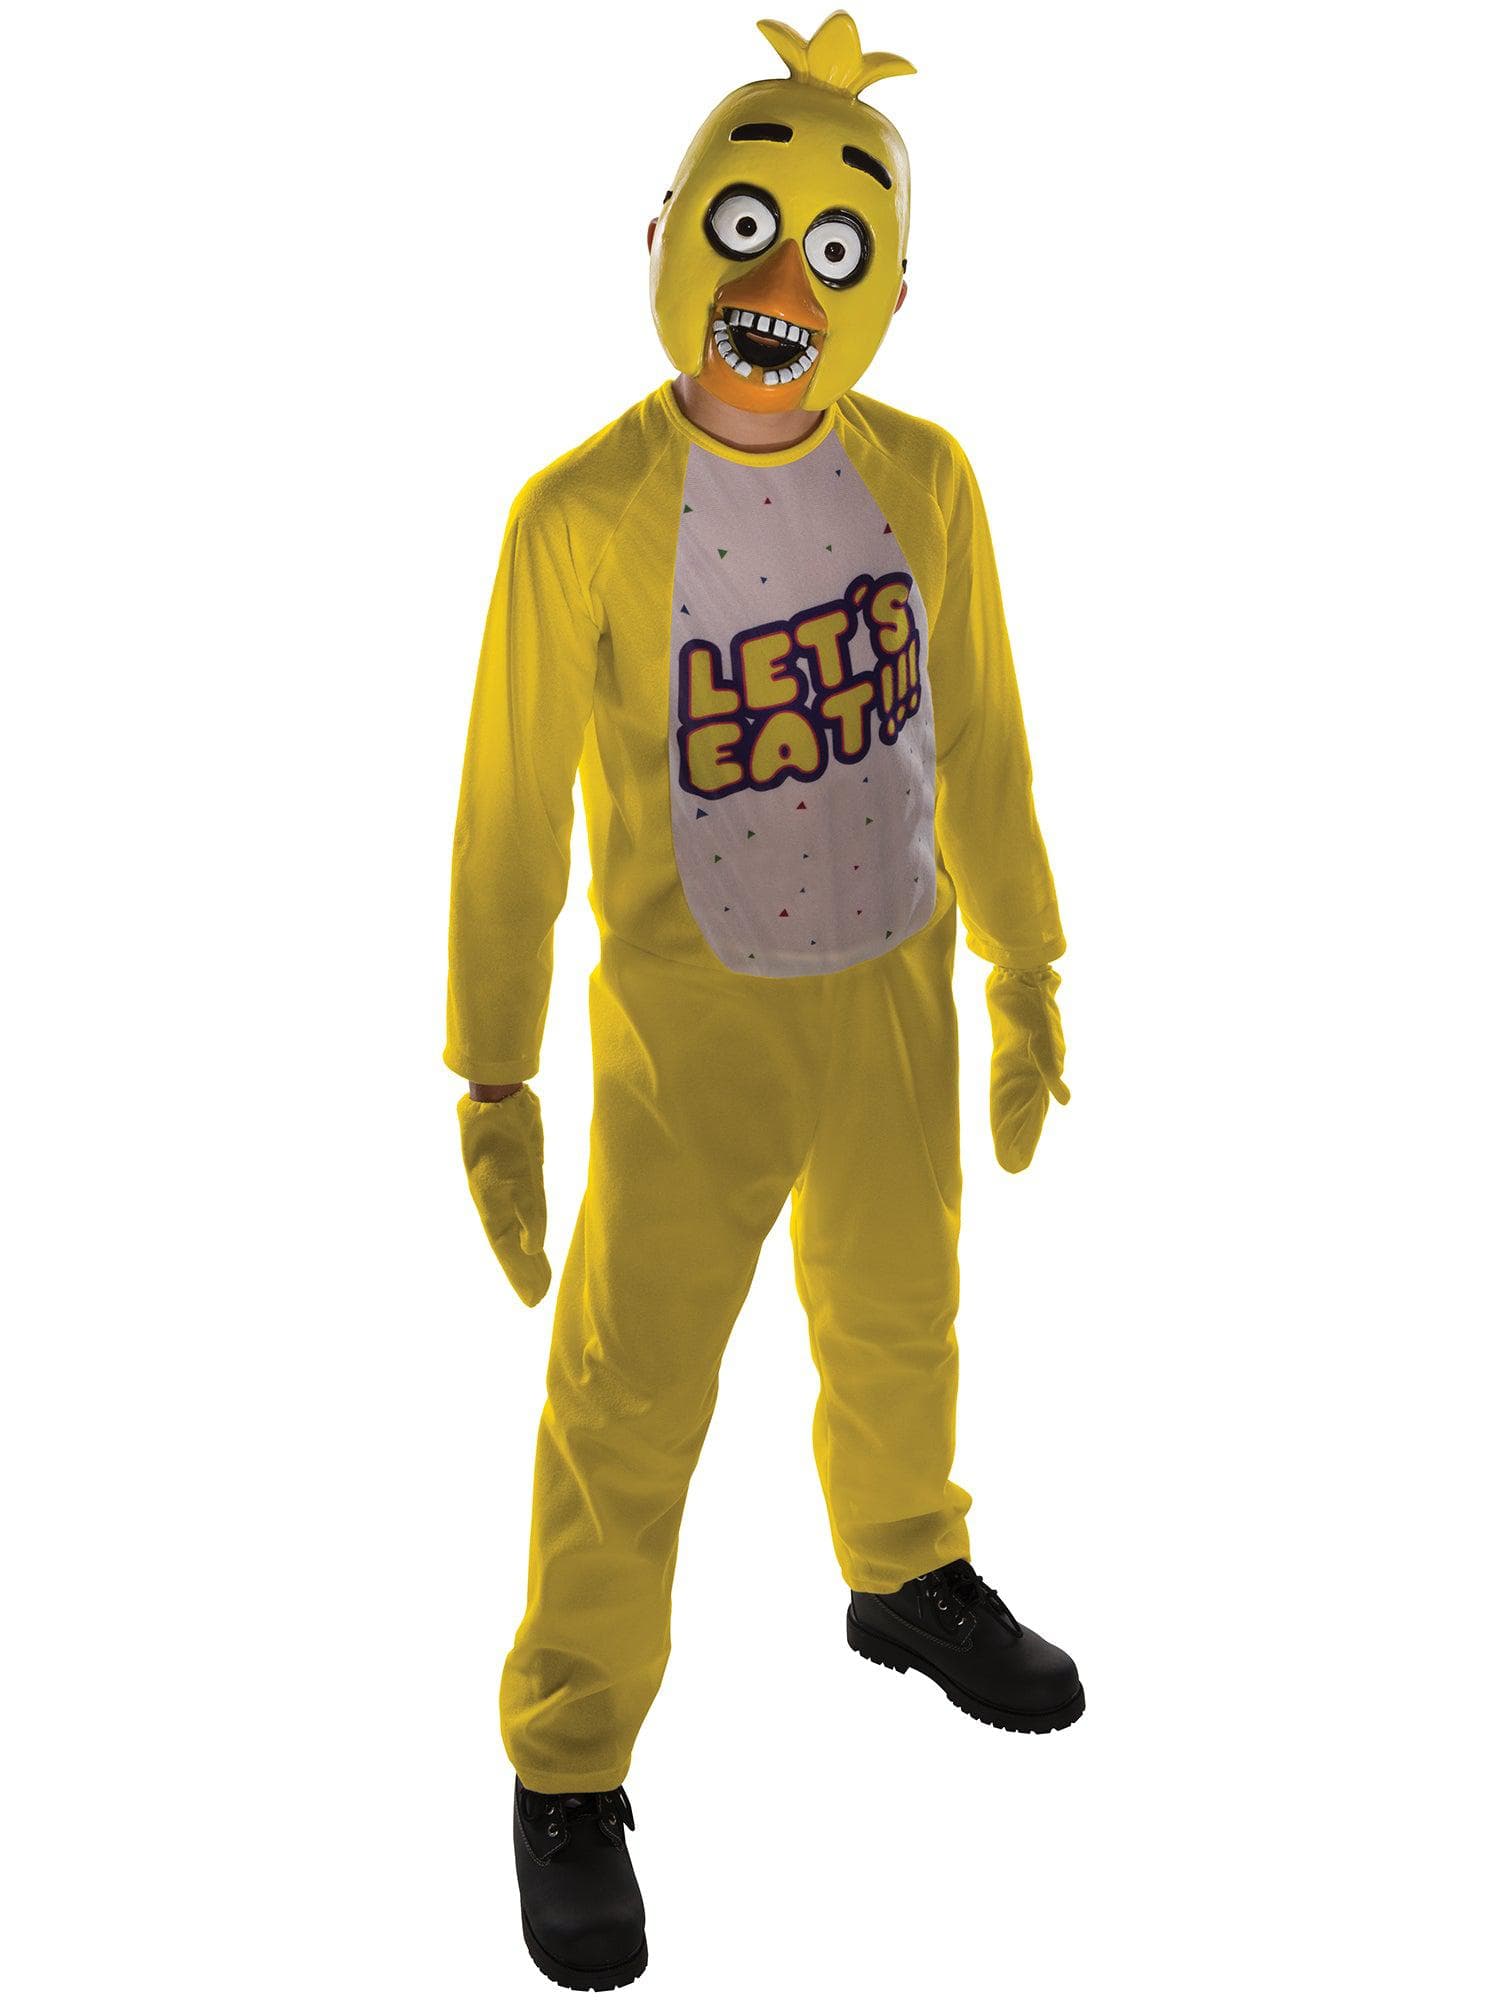 Kids Five Nights At Freddys Chica Costume - costumes.com